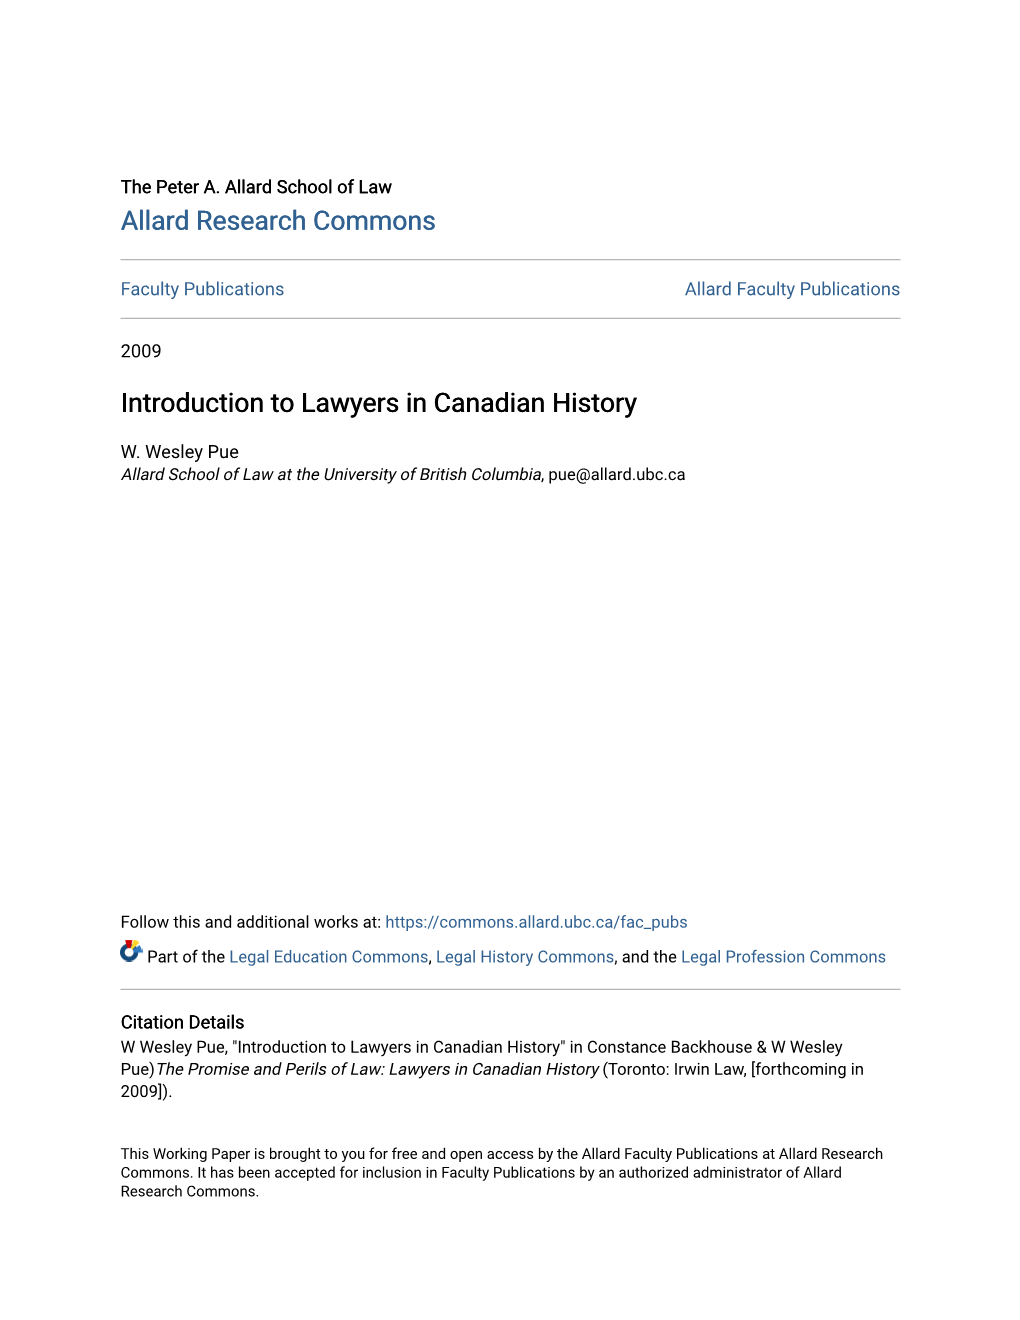 Introduction to Lawyers in Canadian History